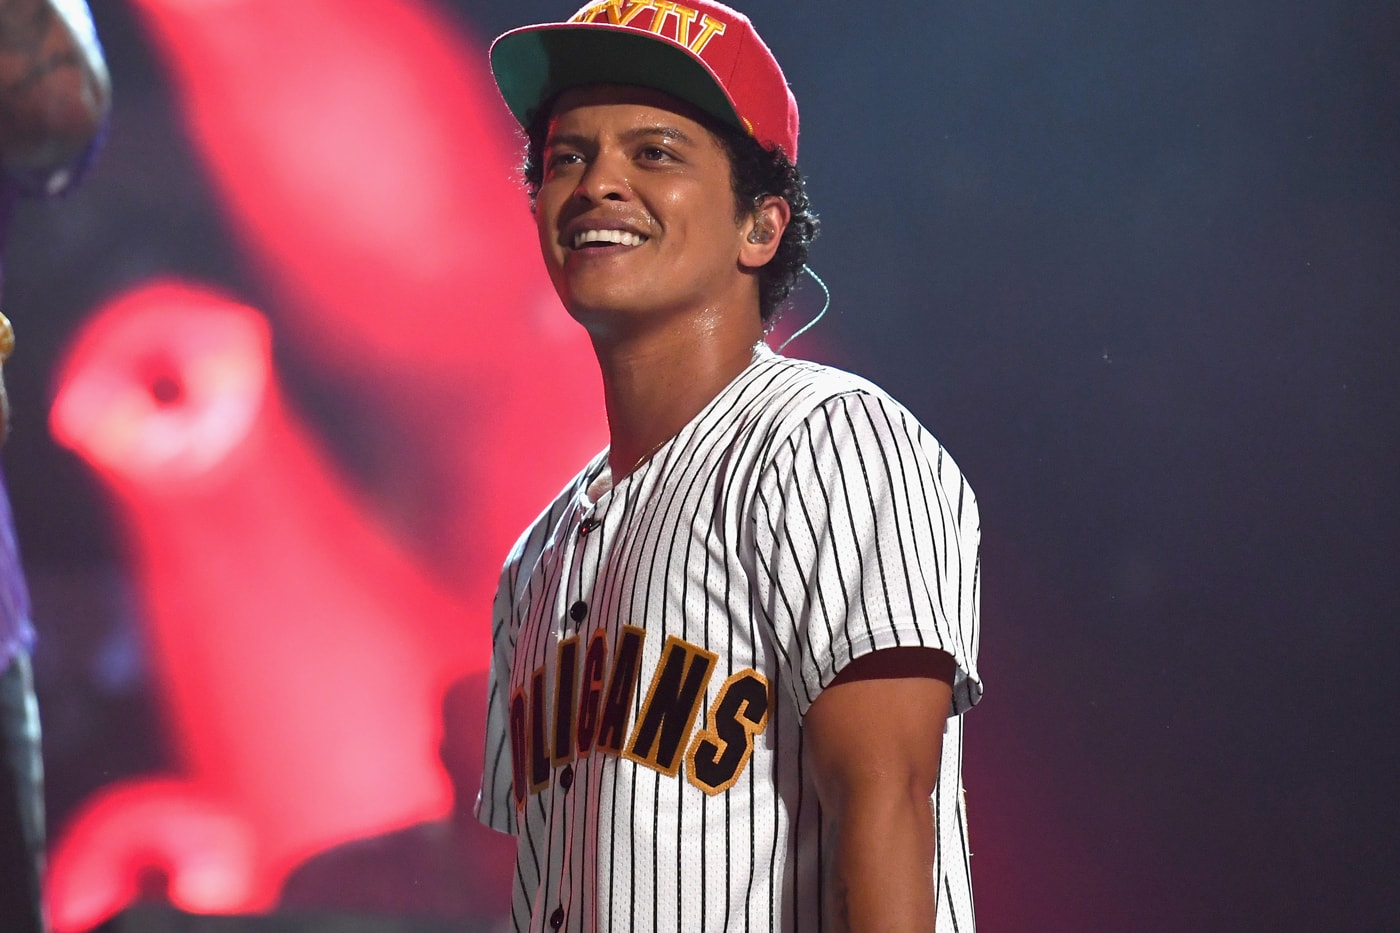 bruno-mars-lupe-fiasco-just-the-way-you-are-remix